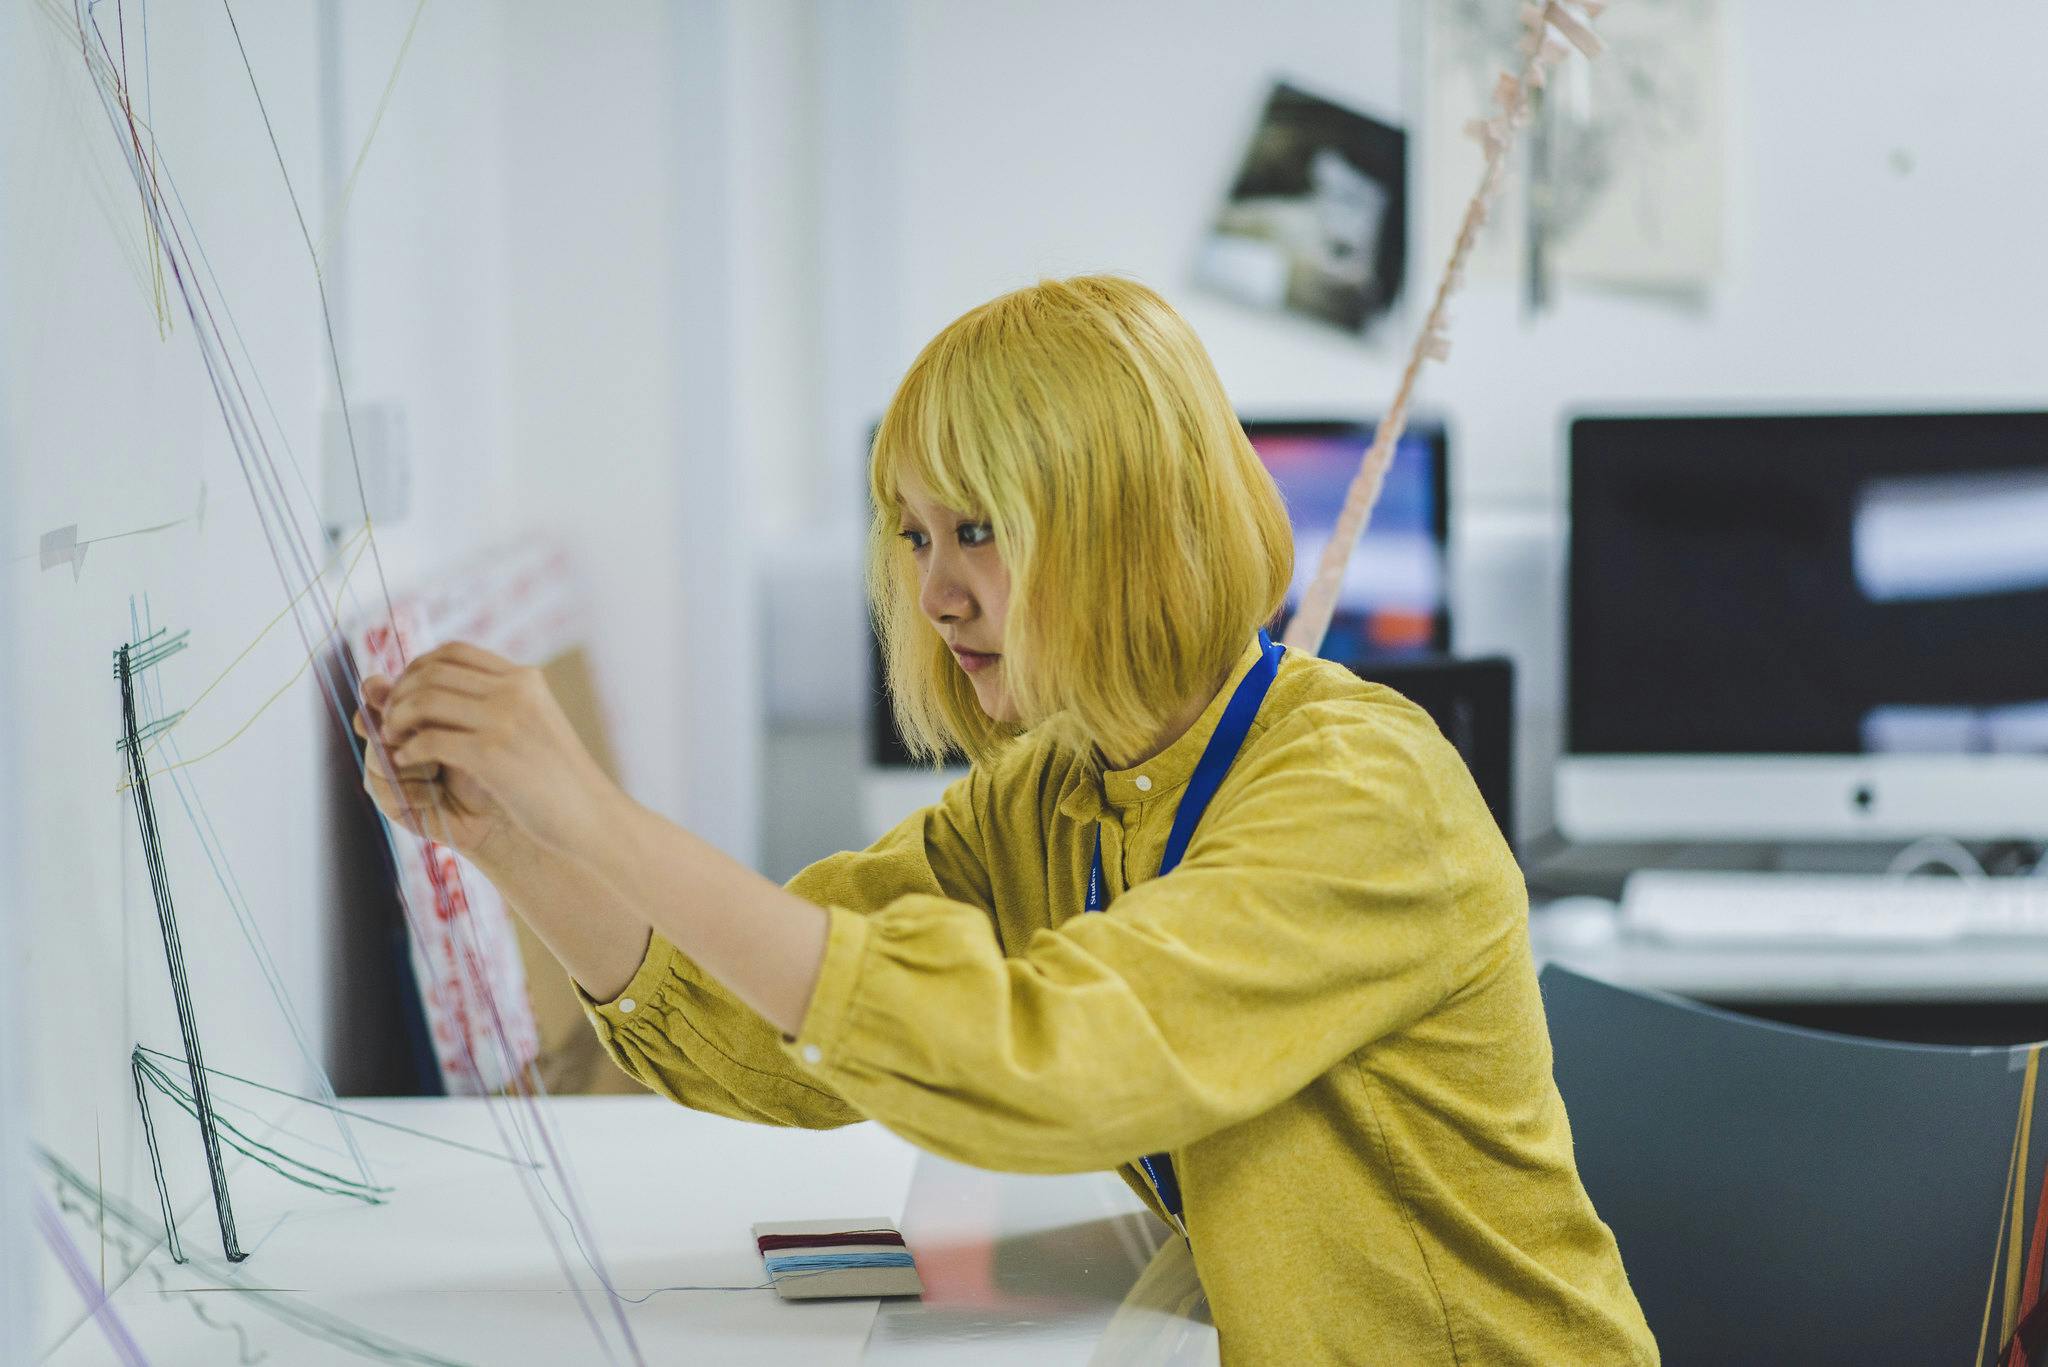 A girl in a yellow top sits at a desk working on an art sculpture built from multicoloured strings.